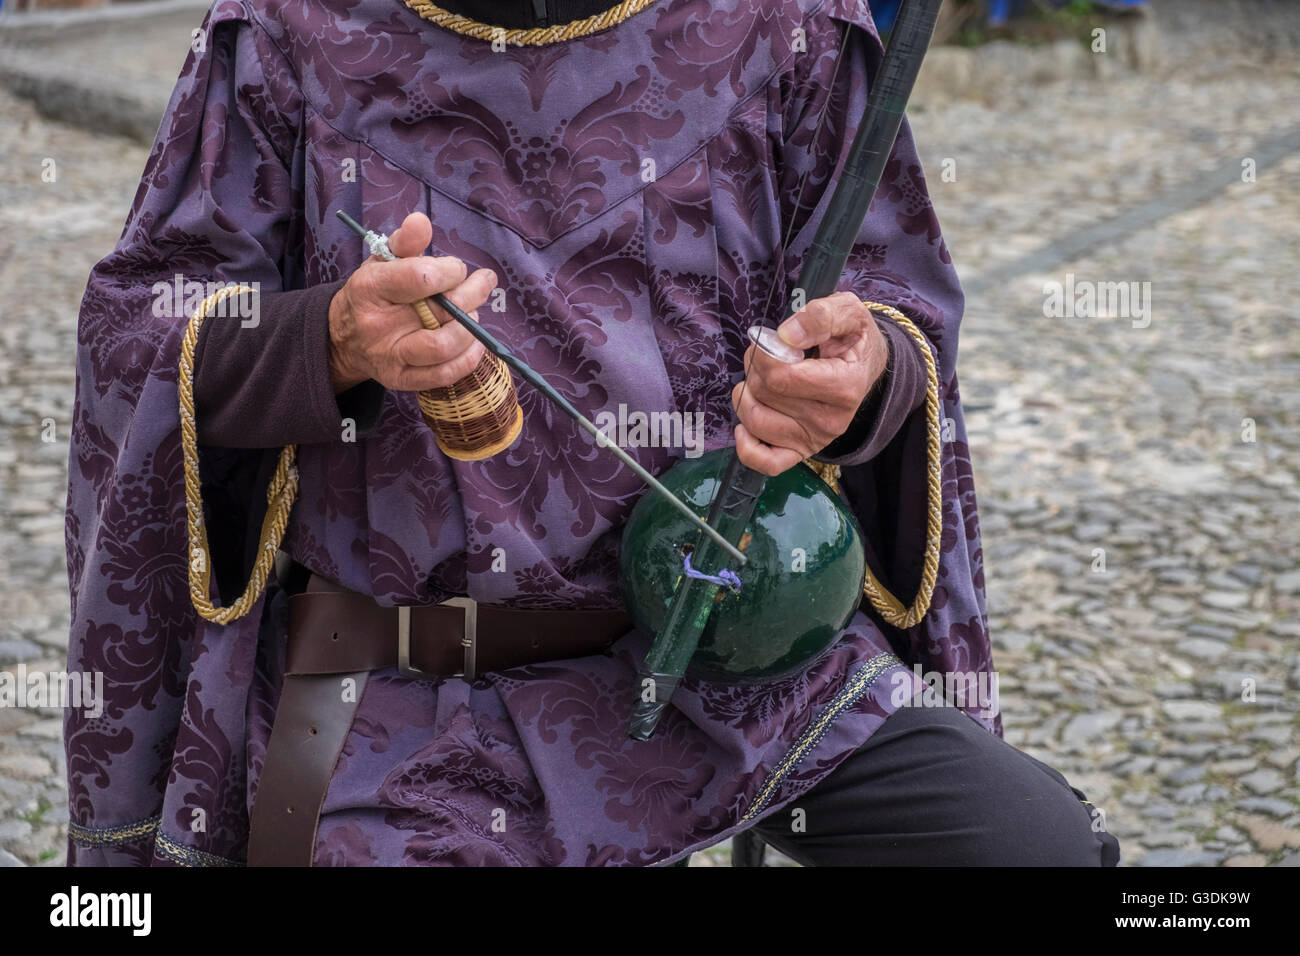 Street musician with traditional instruments and clothing, Obidos, Estremadura, Portugal Stock Photo